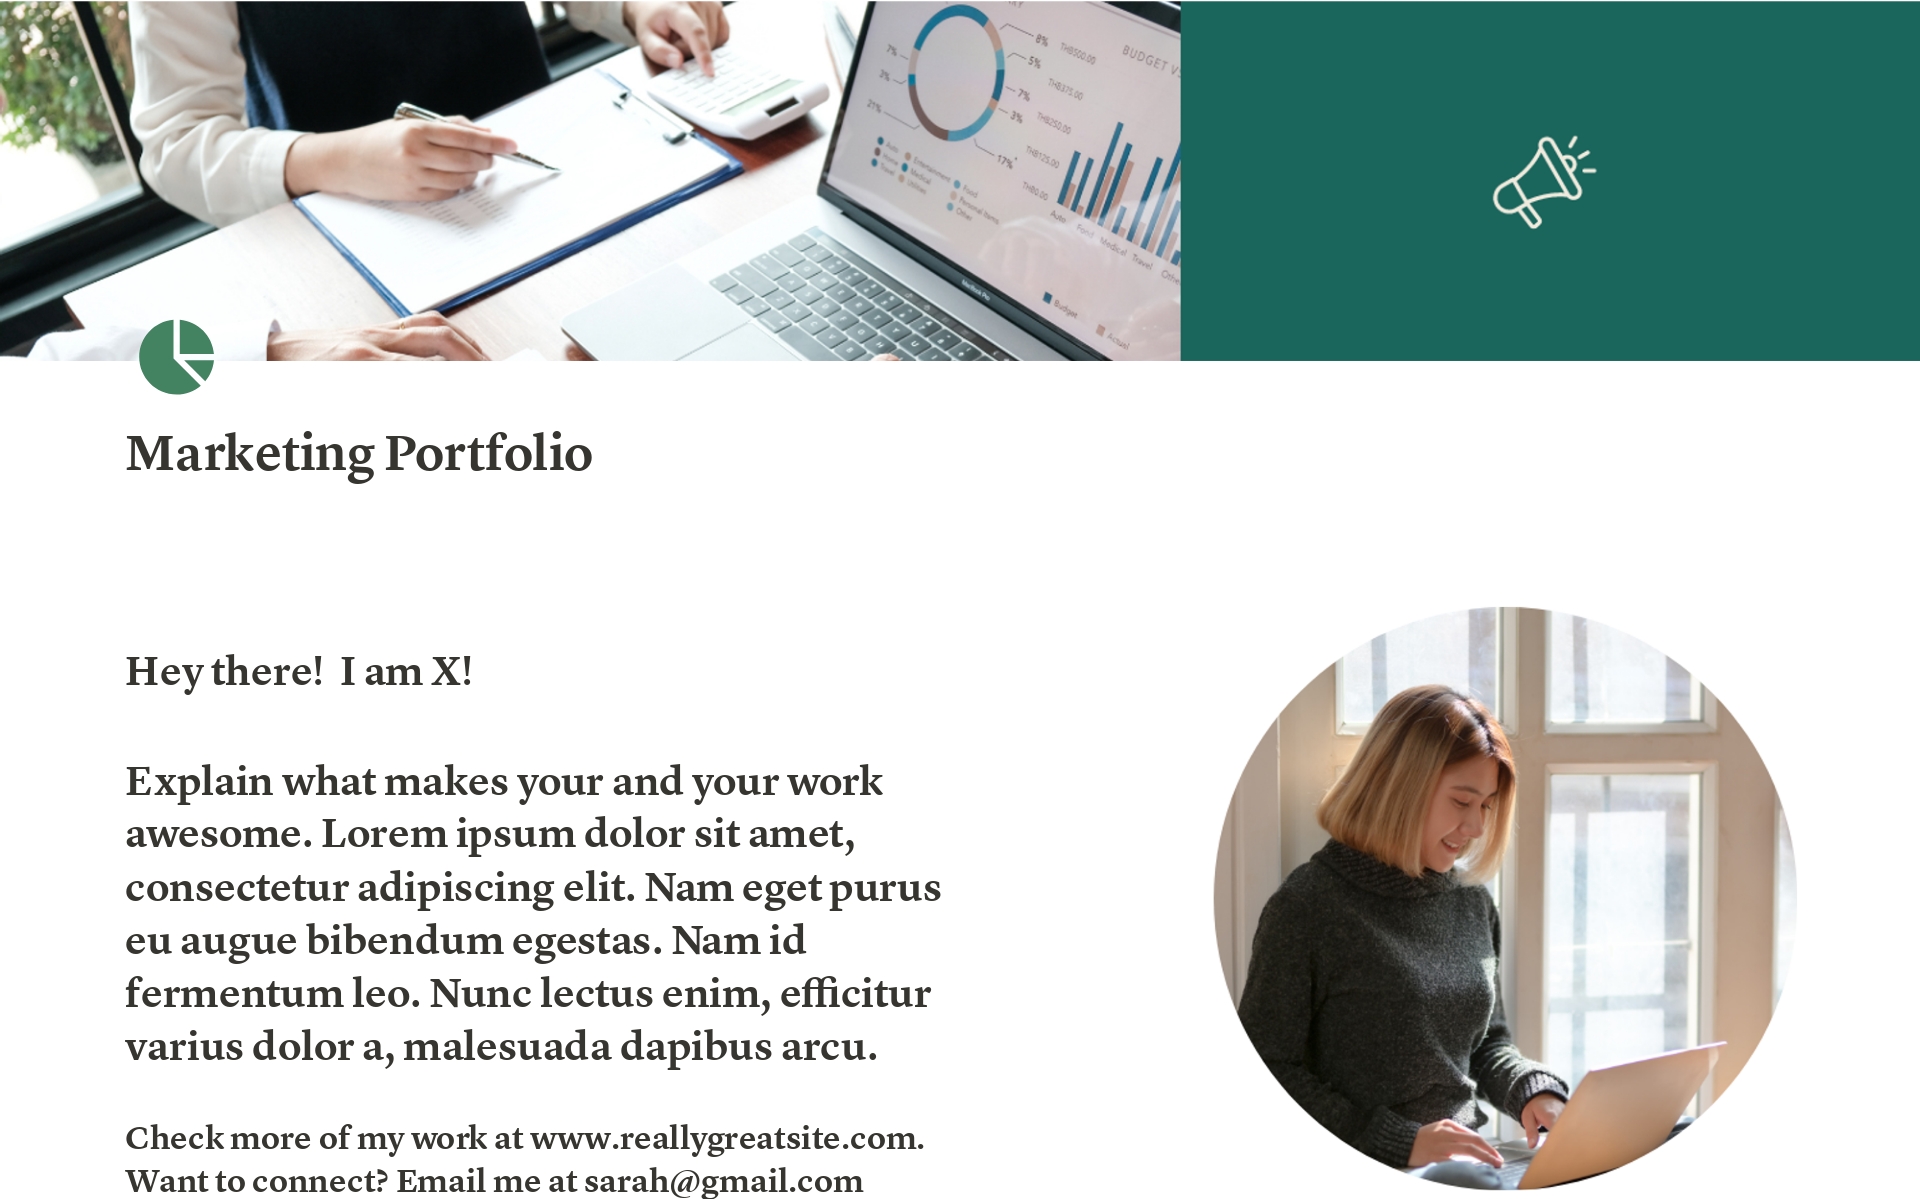 Convert clients with the all-in-one effortless portfolio for your marketing projects